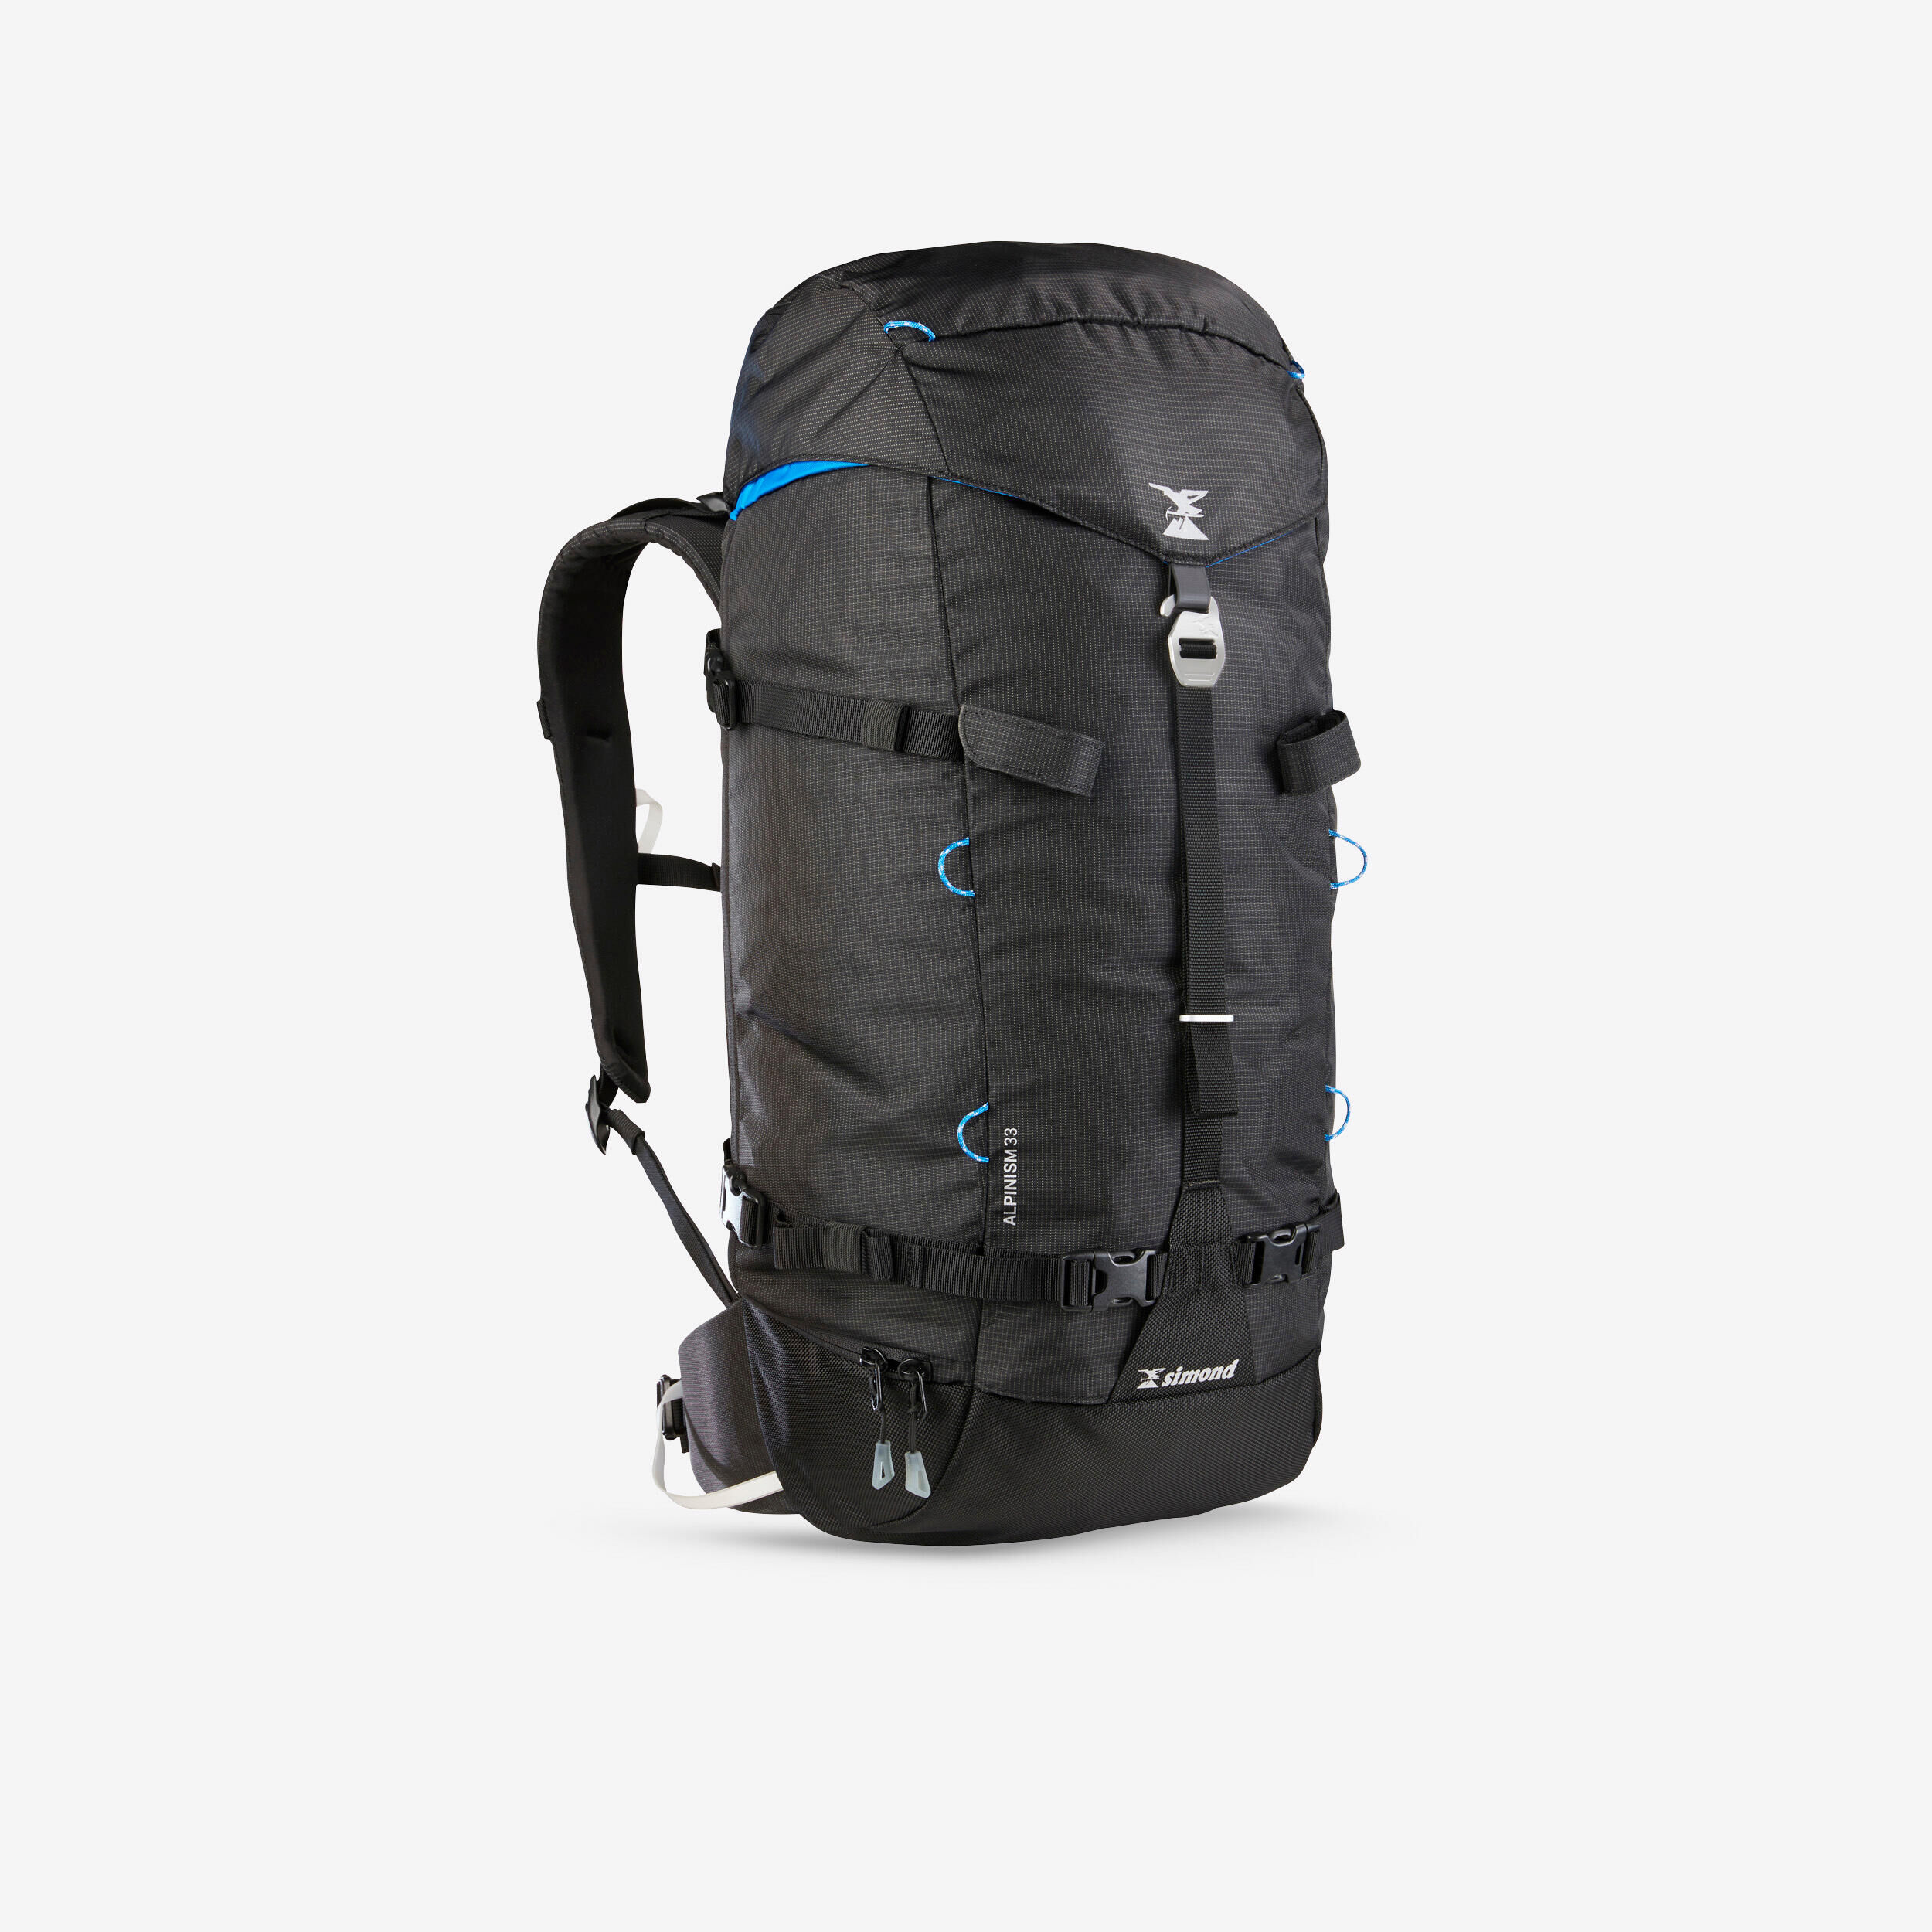 SIMOND Mountaineering Backpack 33 Litres - Alpinism 33 Black